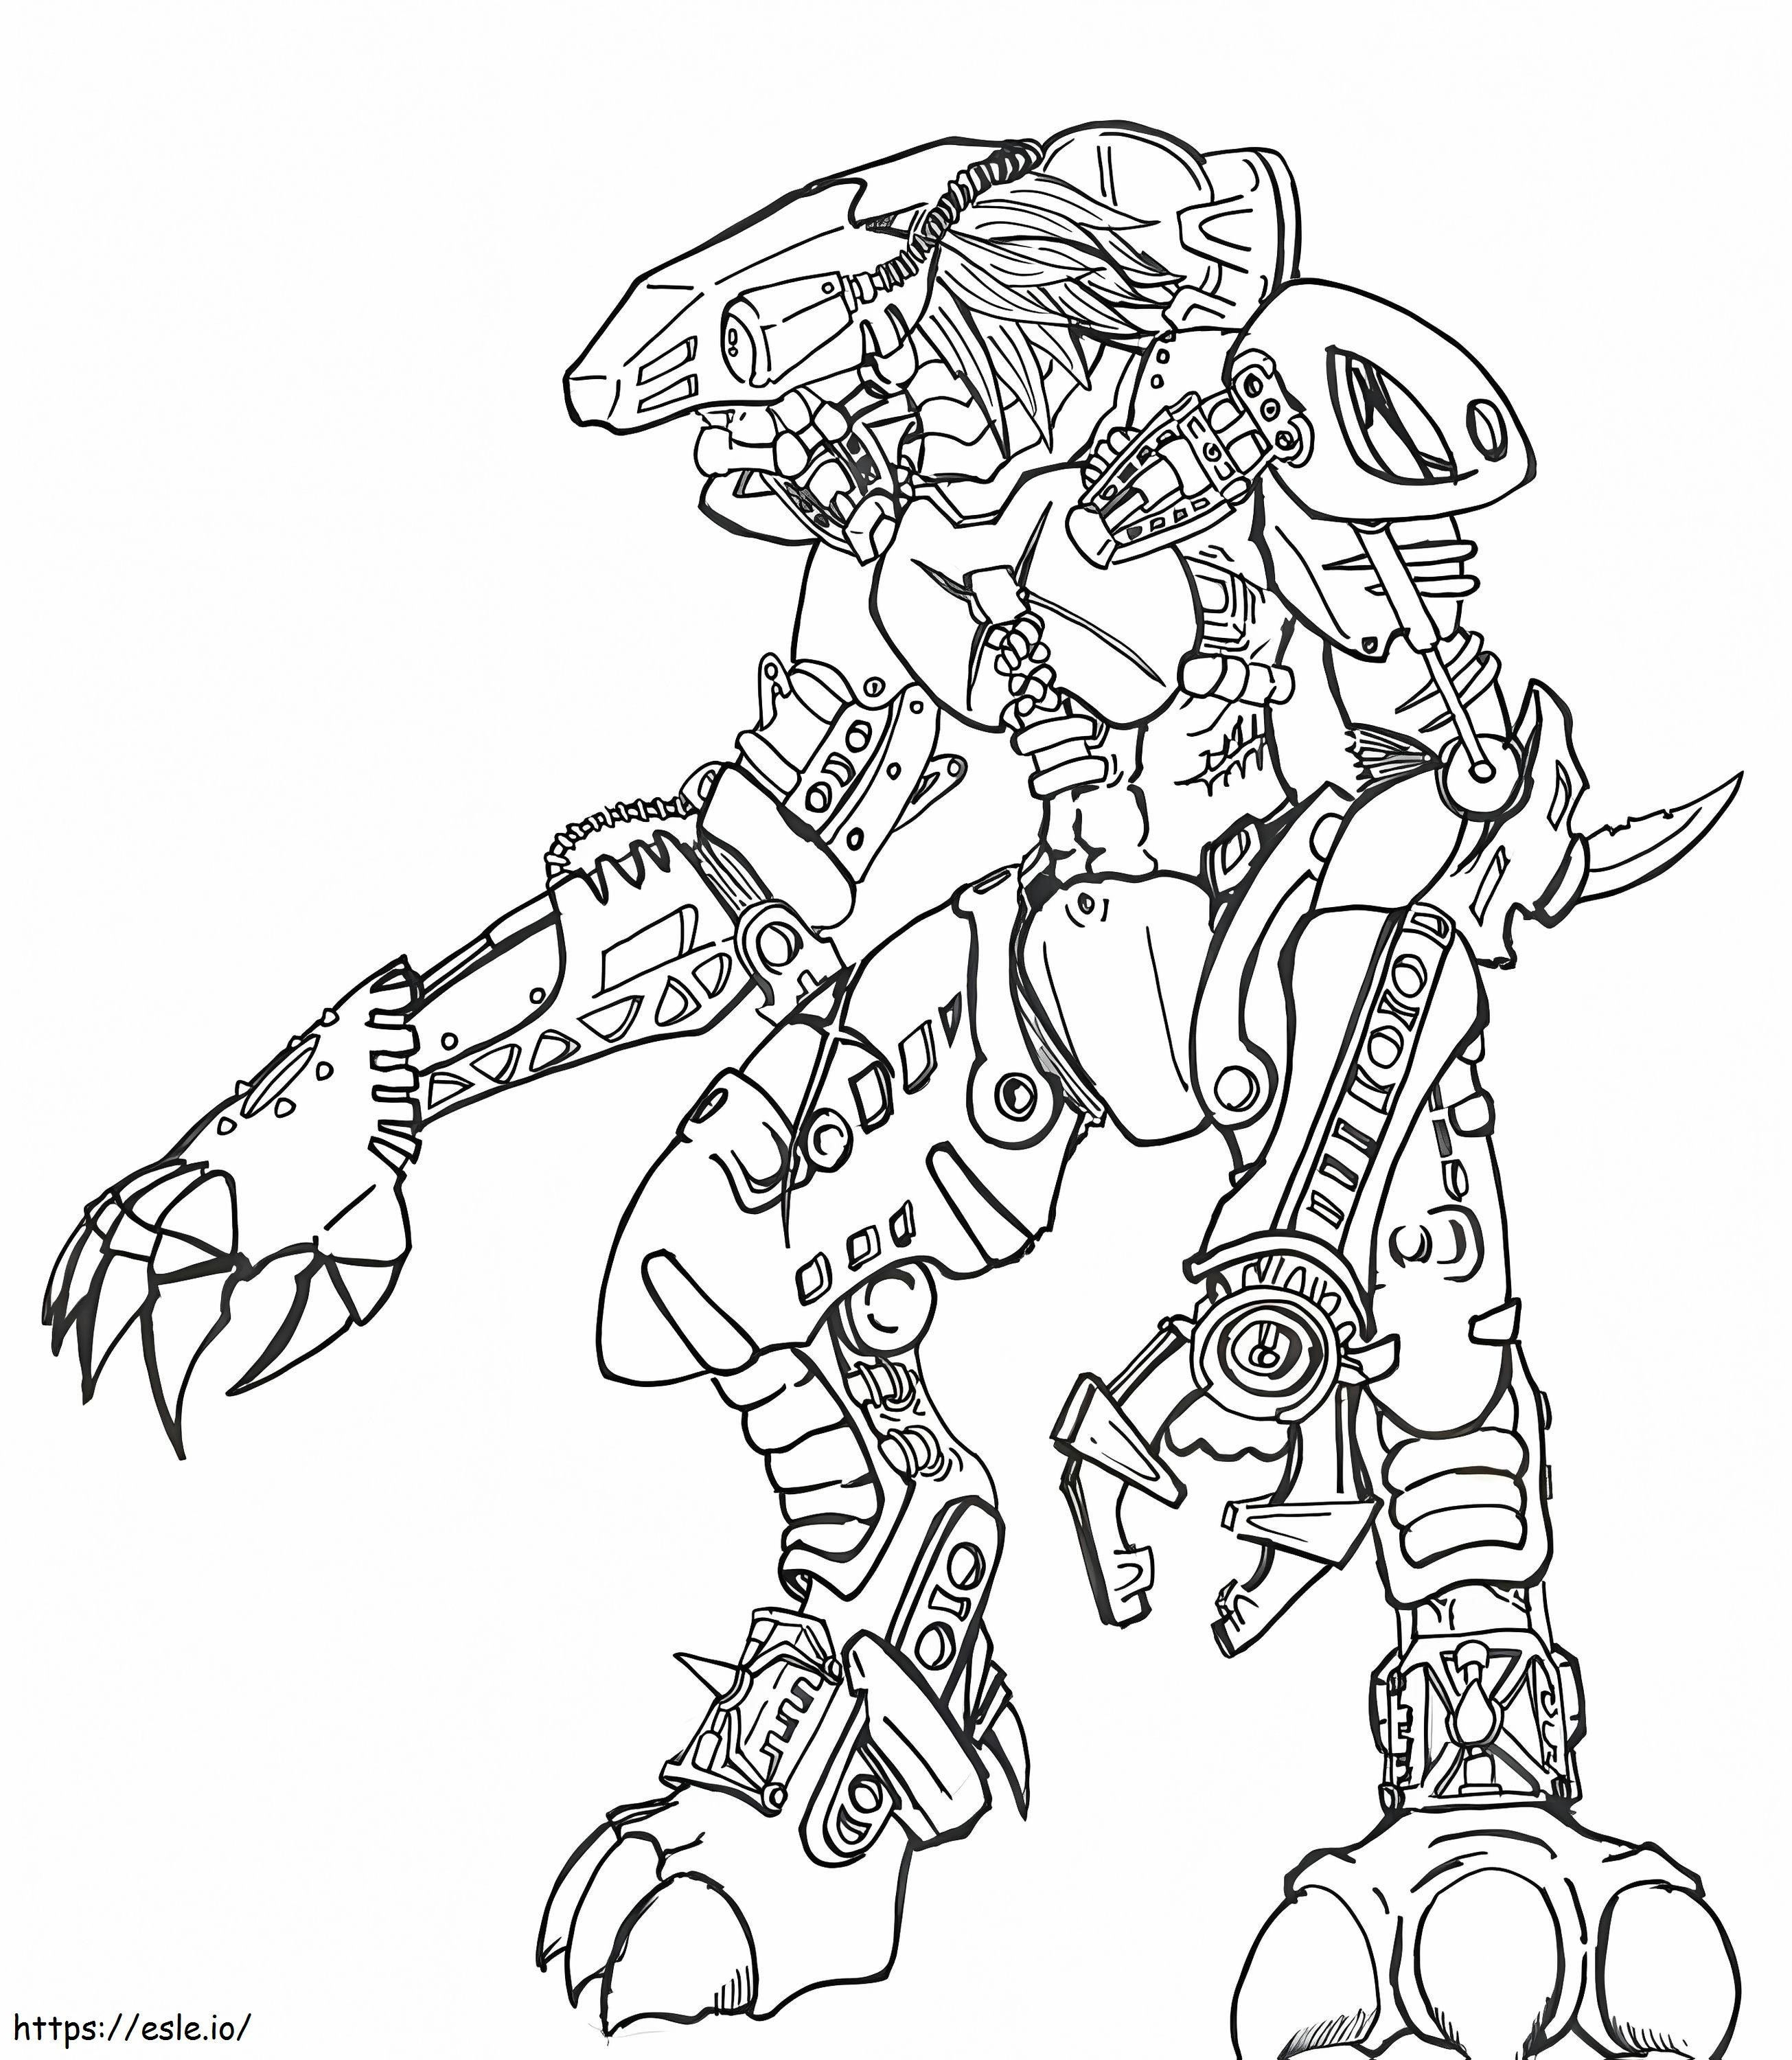 Printable Bionicle coloring page